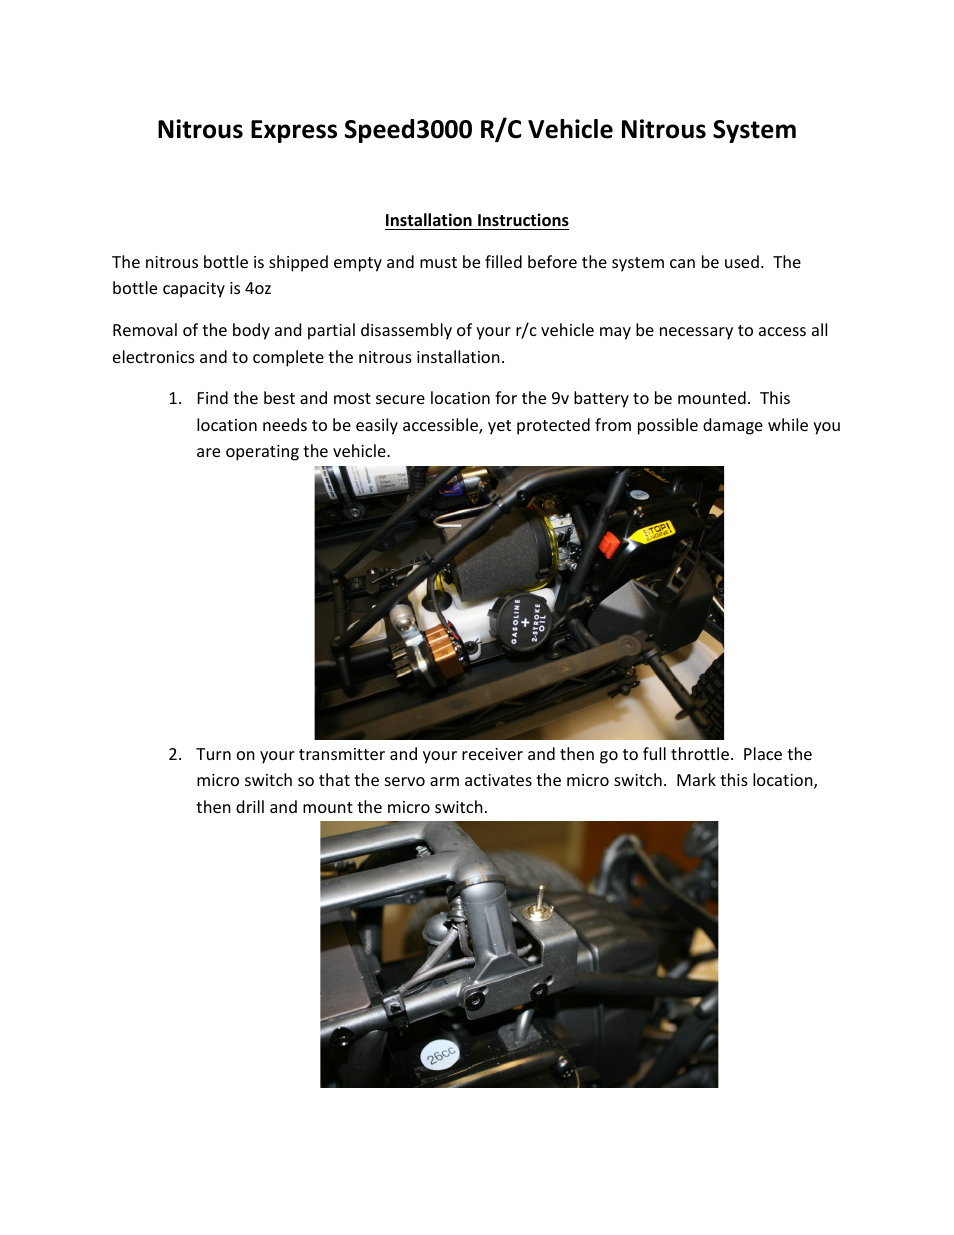 Nitrous Express Speed3000 R/C Vehicle Nitrous System User Manual | 3 pages